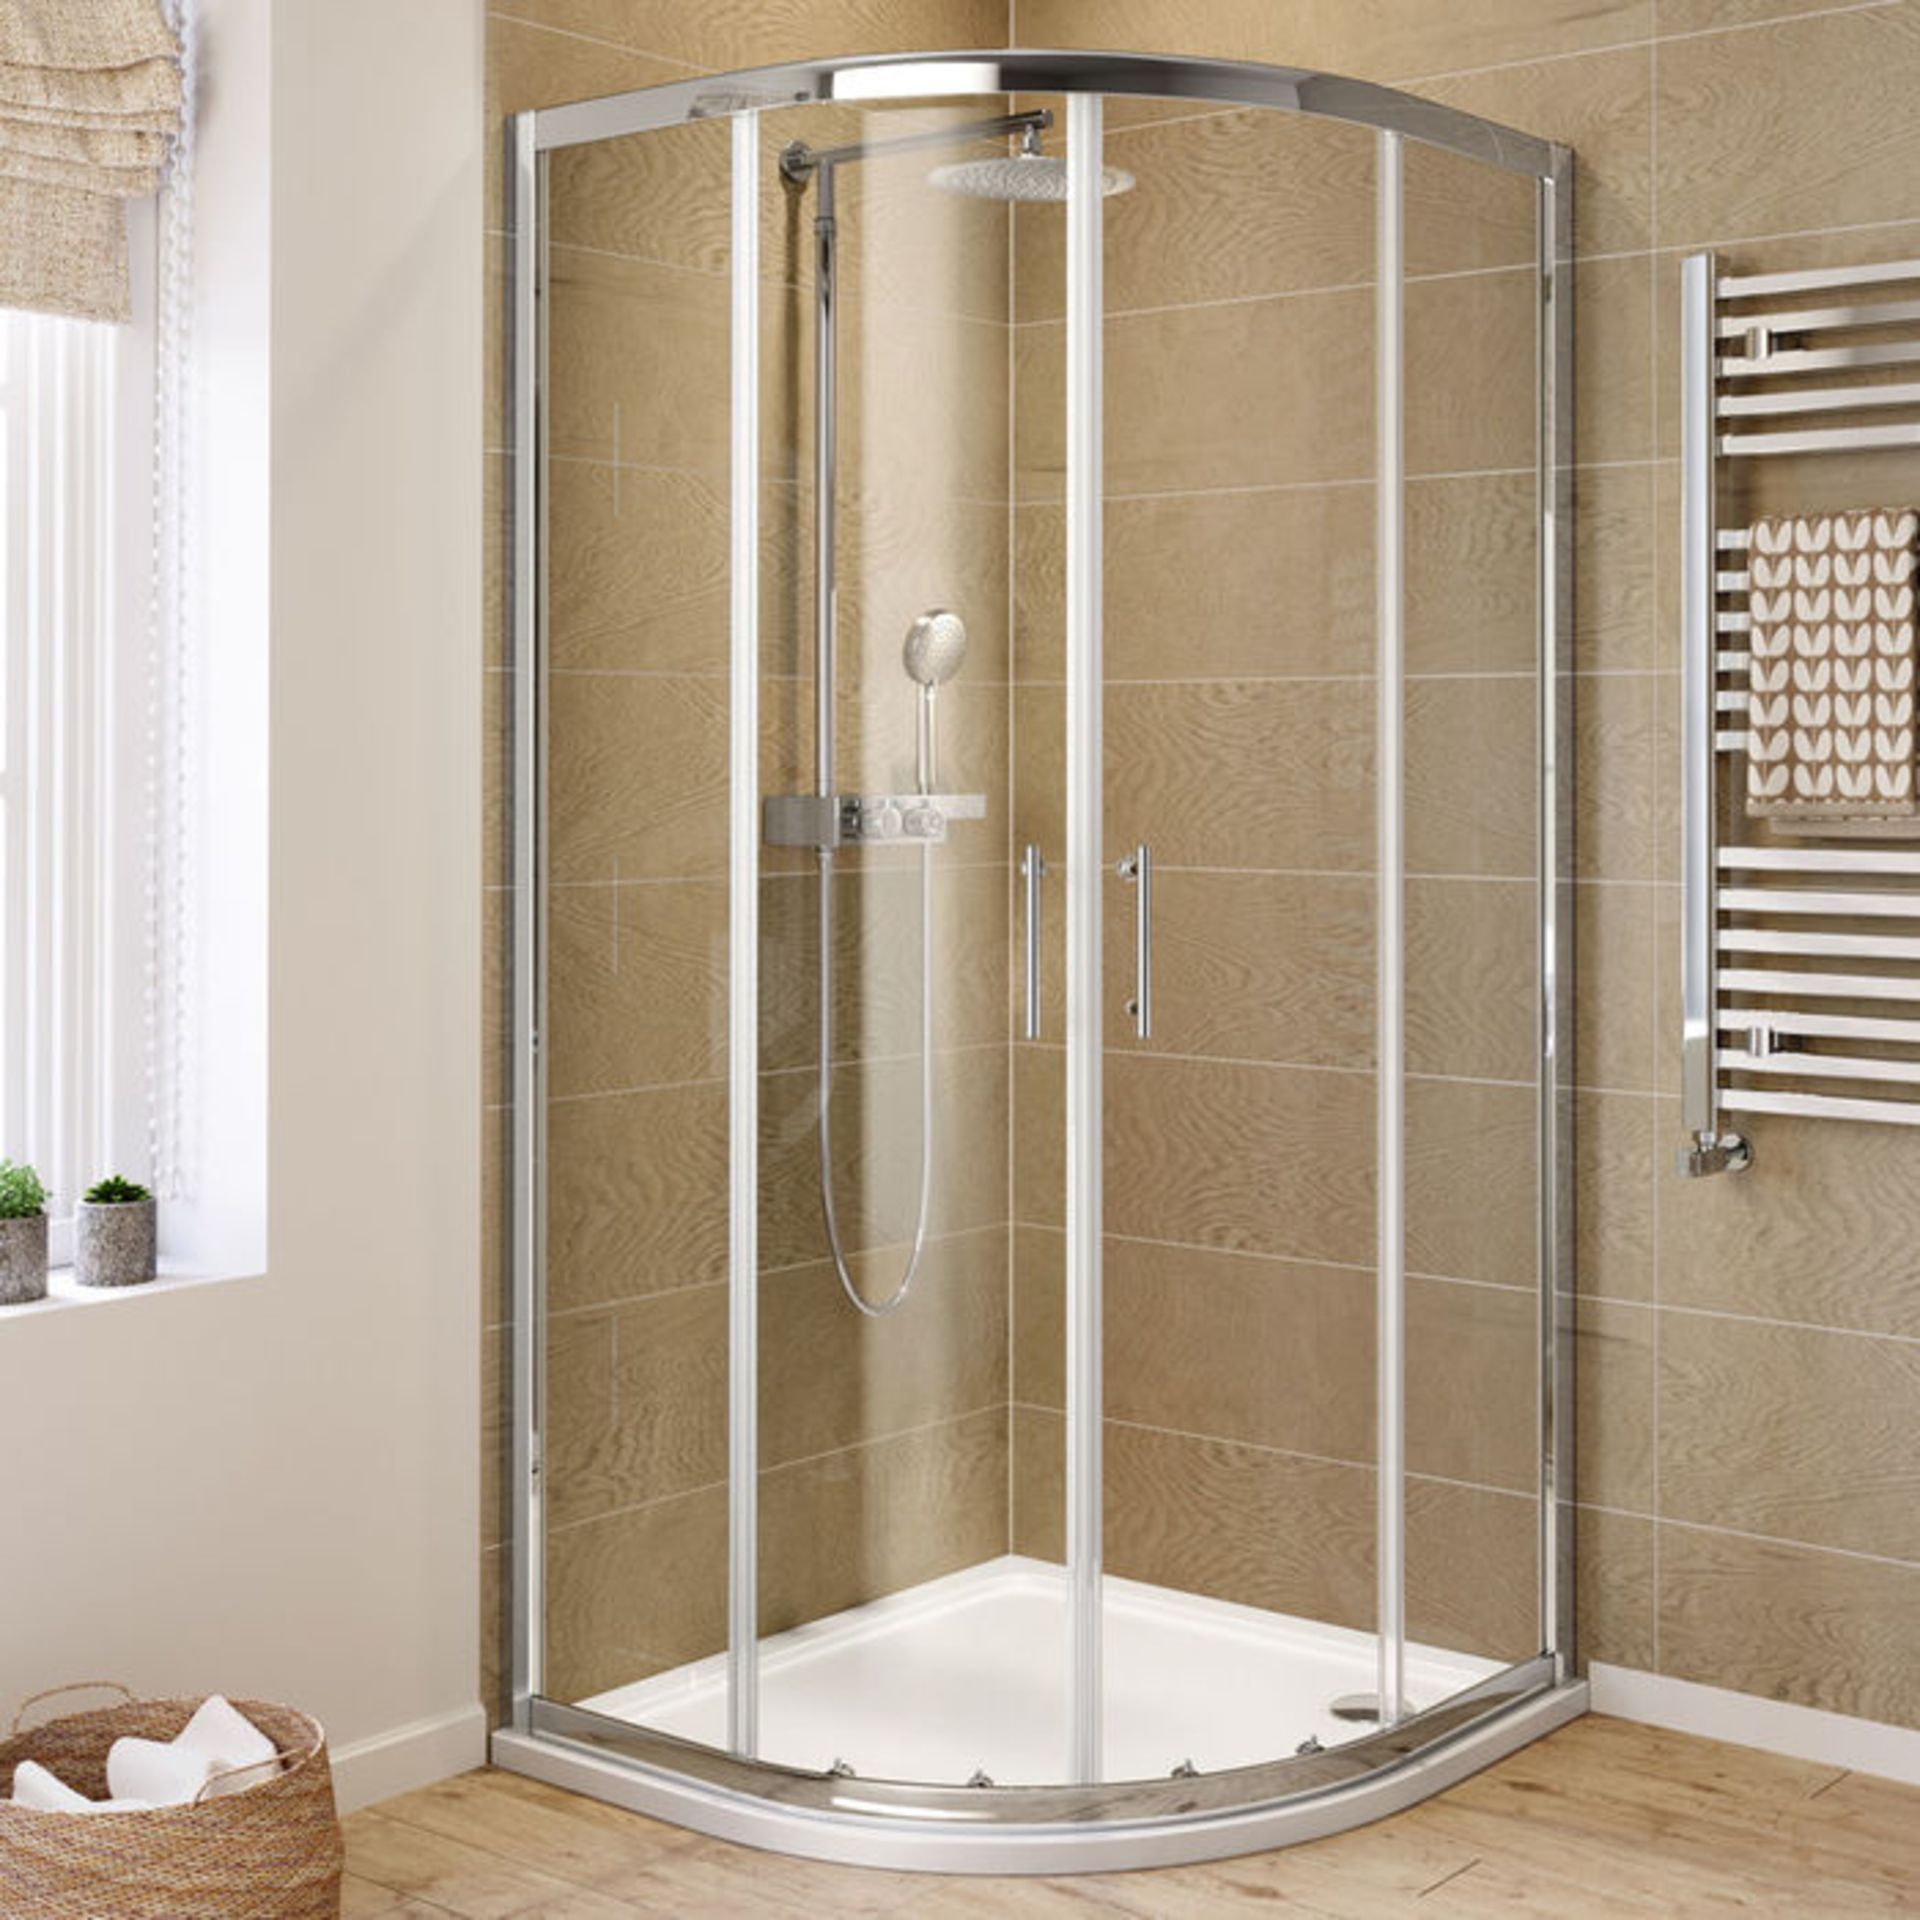 (YC60) NEW 900x900mm - 6mm - Elements Quadrant Shower Enclosure. RRP £293.99. 6mm Safety Glass... - Image 2 of 3